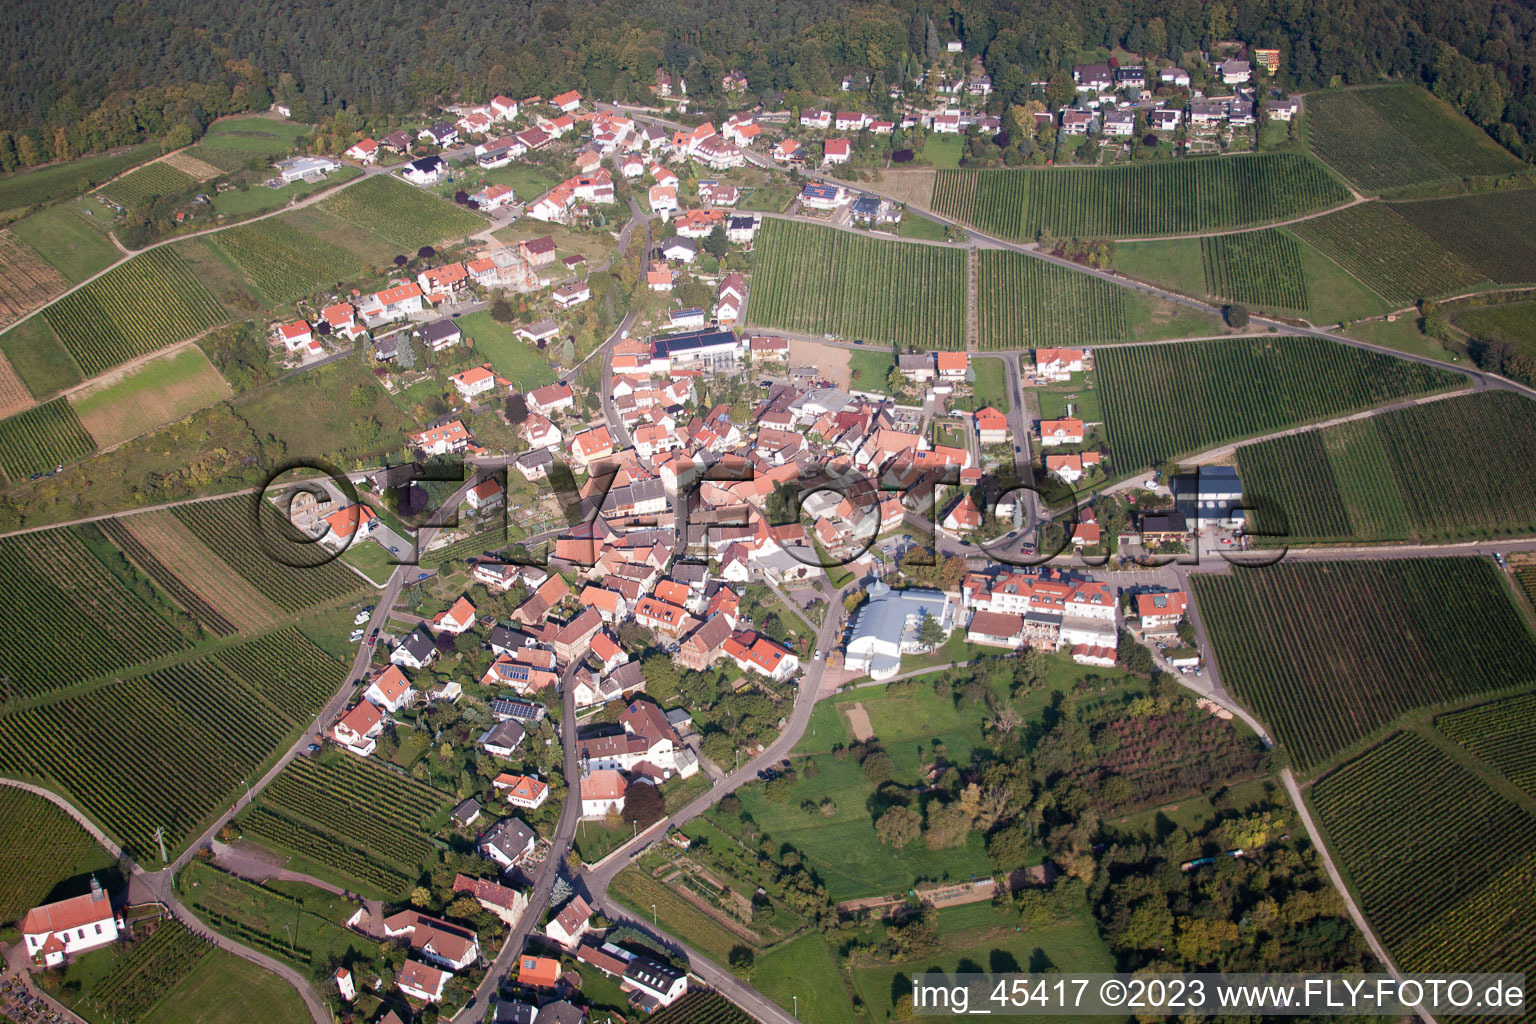 District Gleiszellen in Gleiszellen-Gleishorbach in the state Rhineland-Palatinate, Germany out of the air